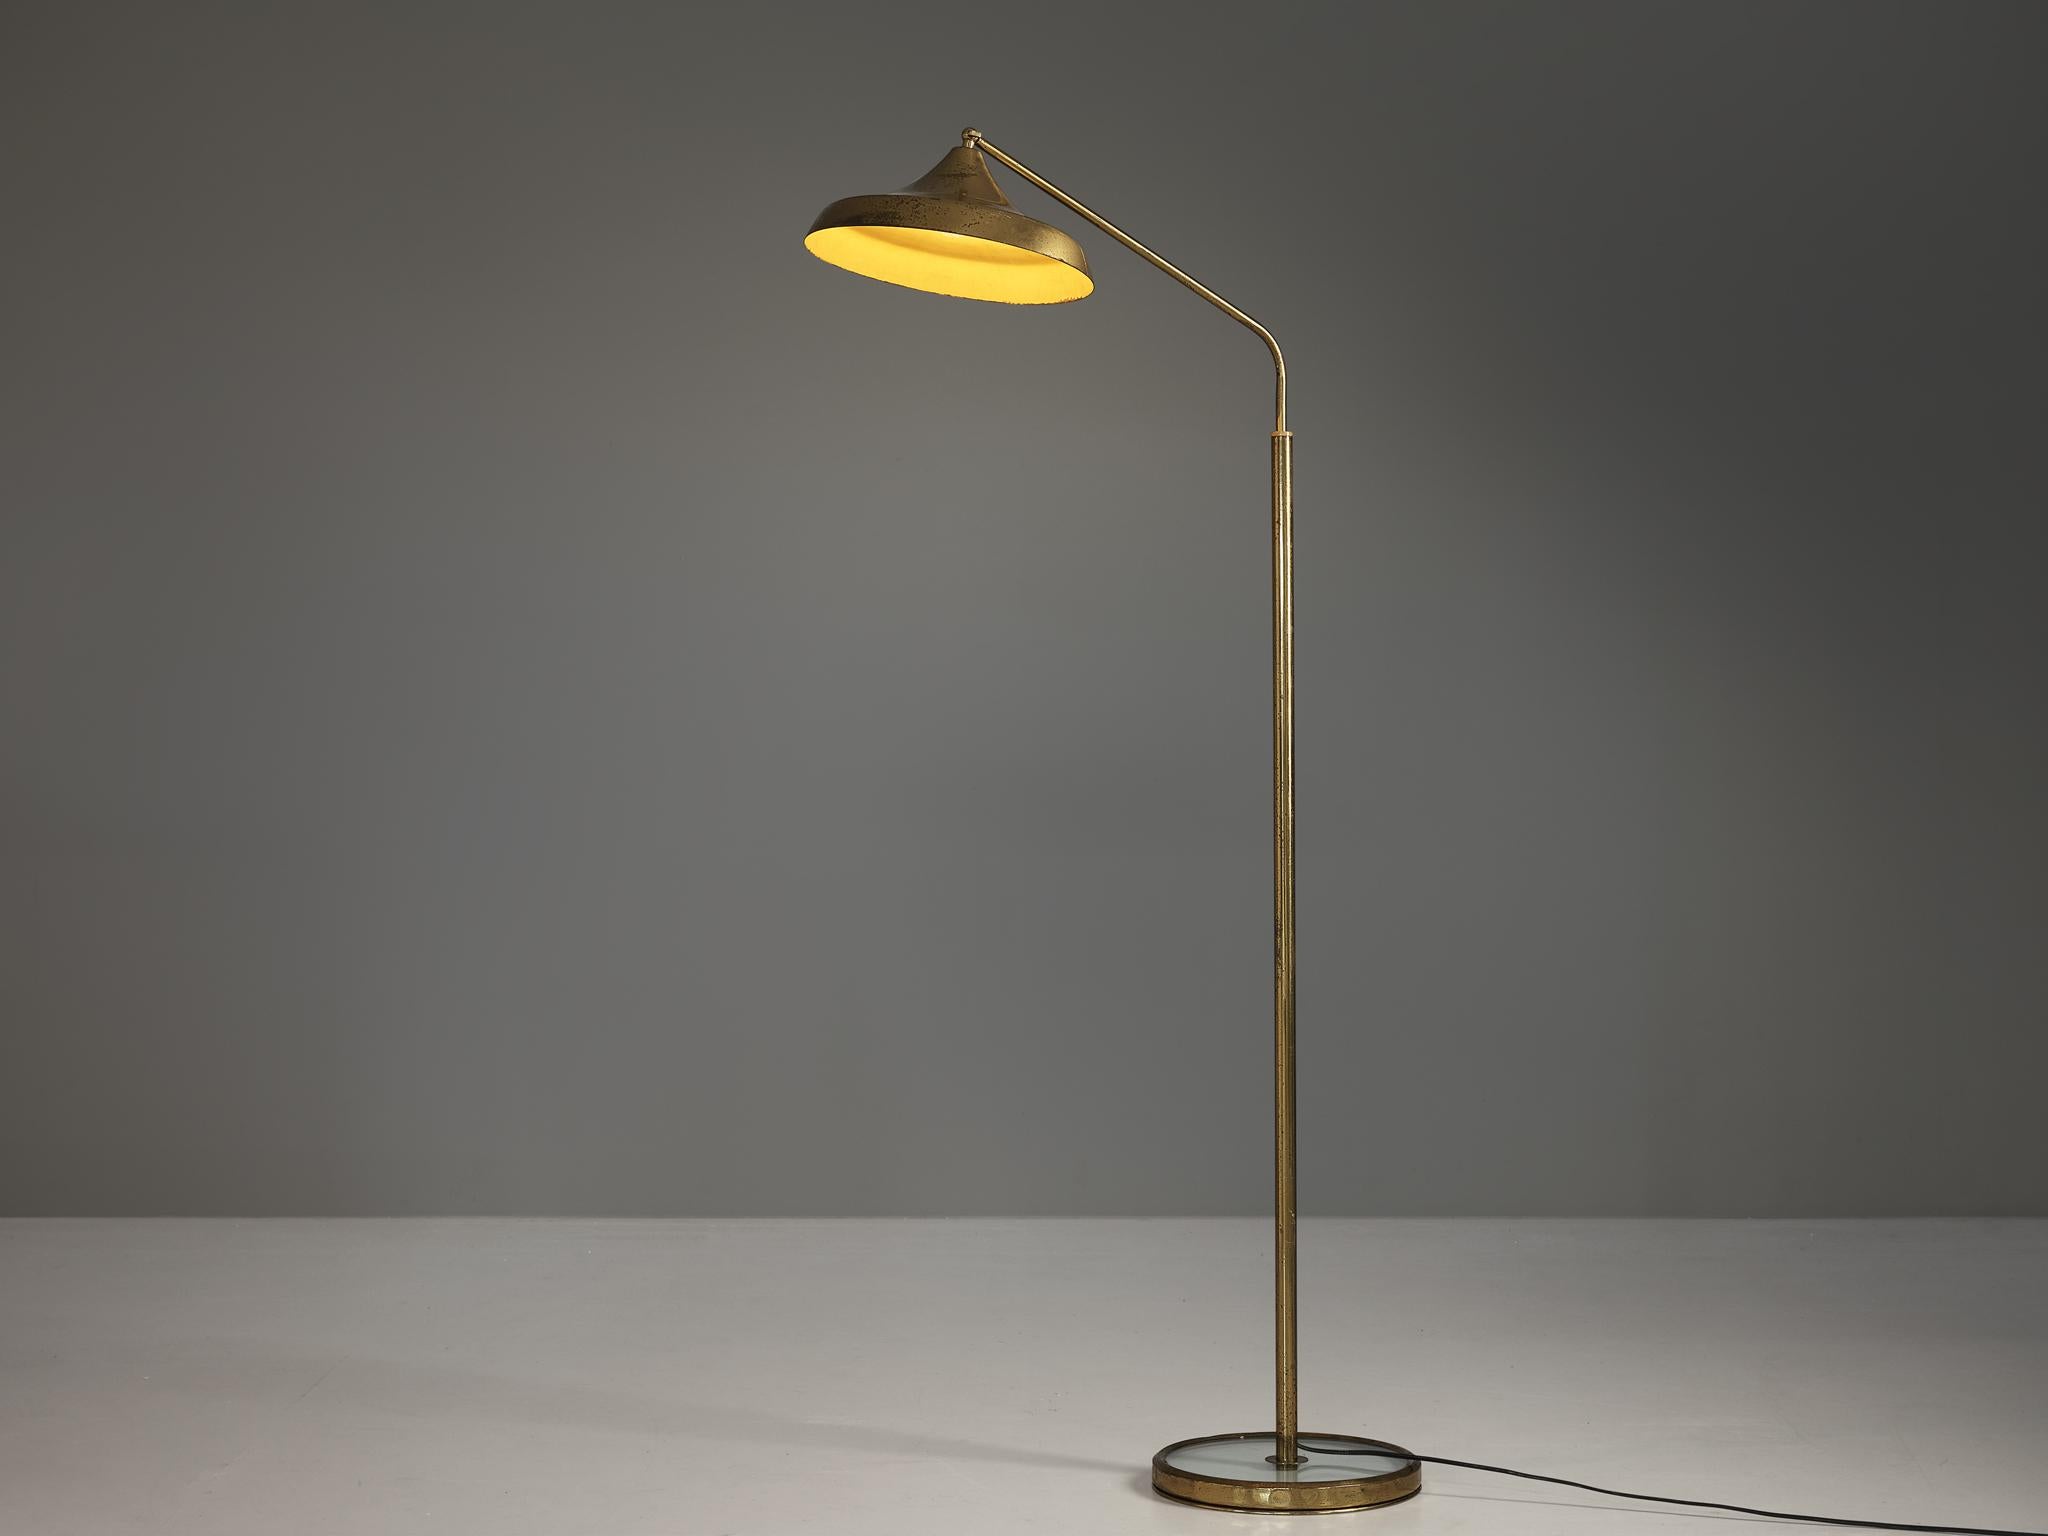 Fontana Arte, floor lamp, brass, glass, Italy, 1960s.  

Manufactured by Fontana Arte, this exquisite floor lamp boasts a delicate, patinated design. Its gracefully curved stem is made in brass, lending an air of elegance to any space. Noteworthy